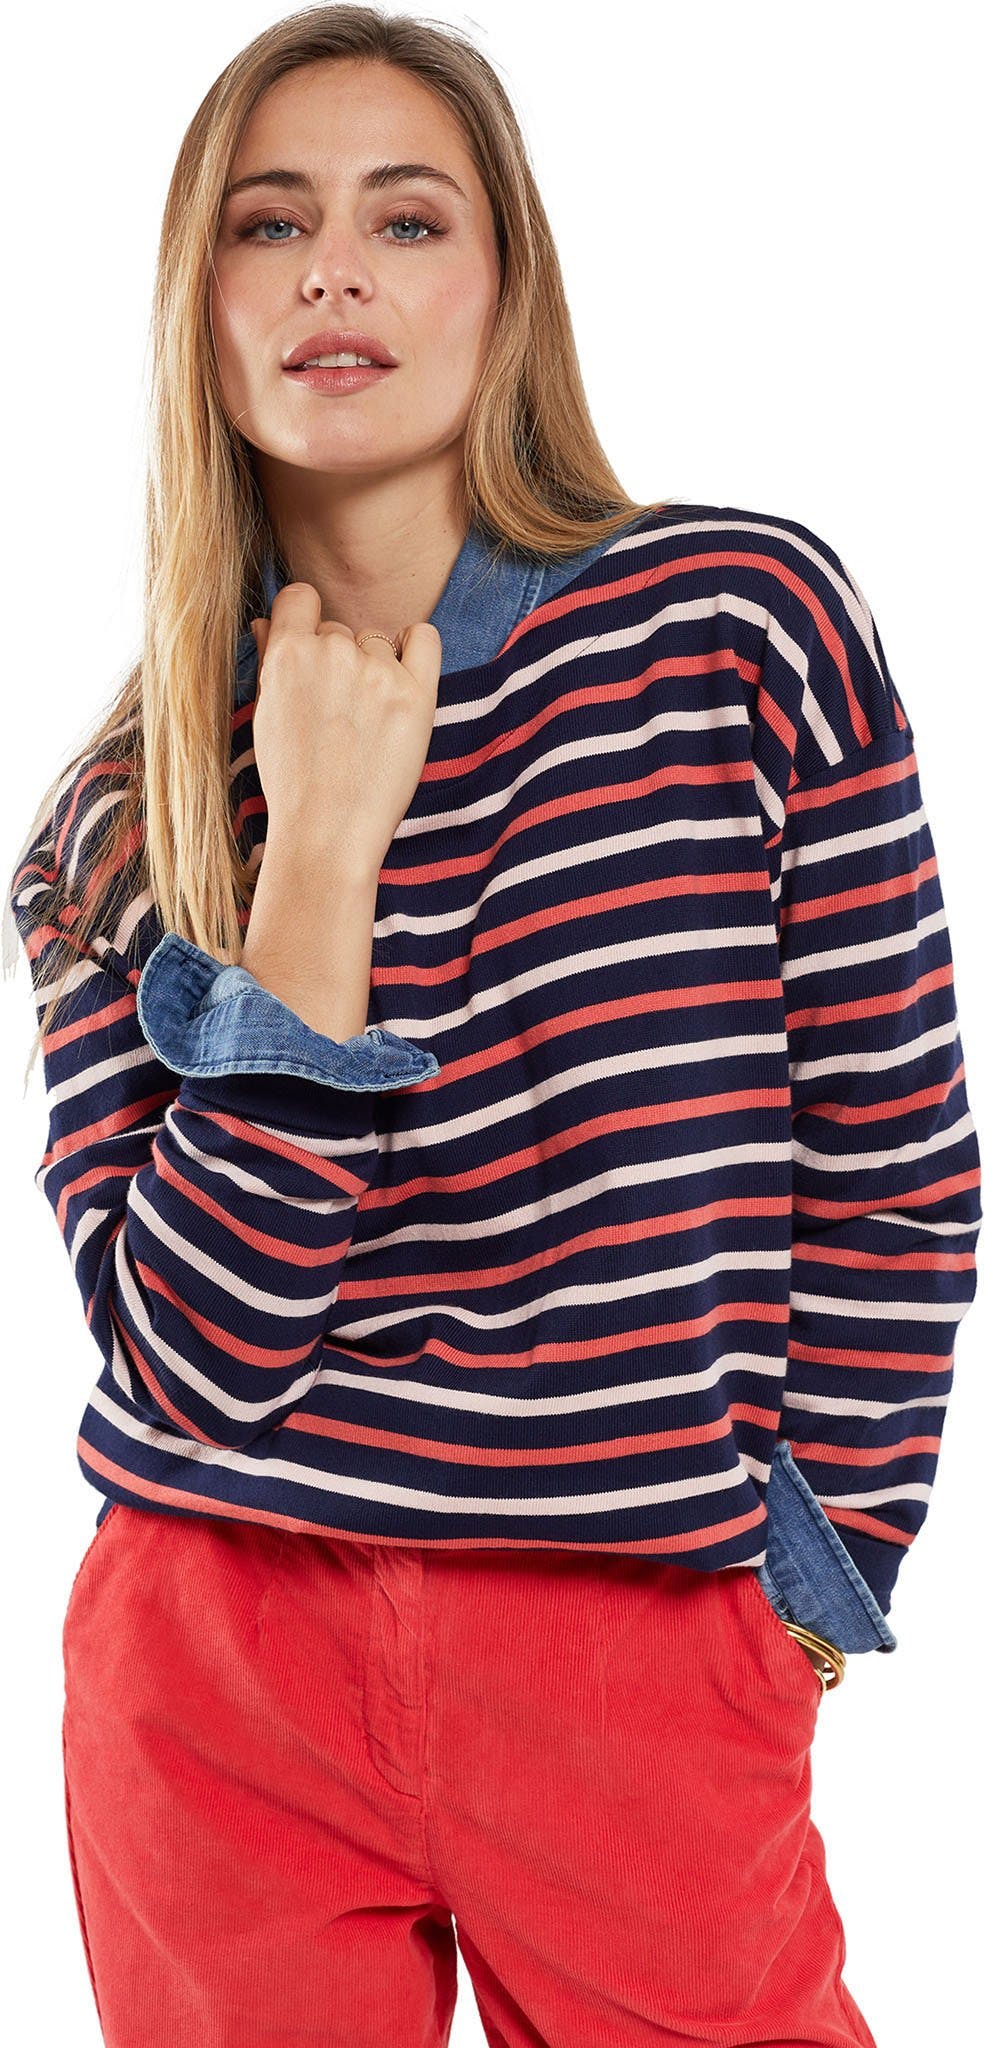 Product image for Rustic Cotton Breton Tricolor Striped Jersey - Women's